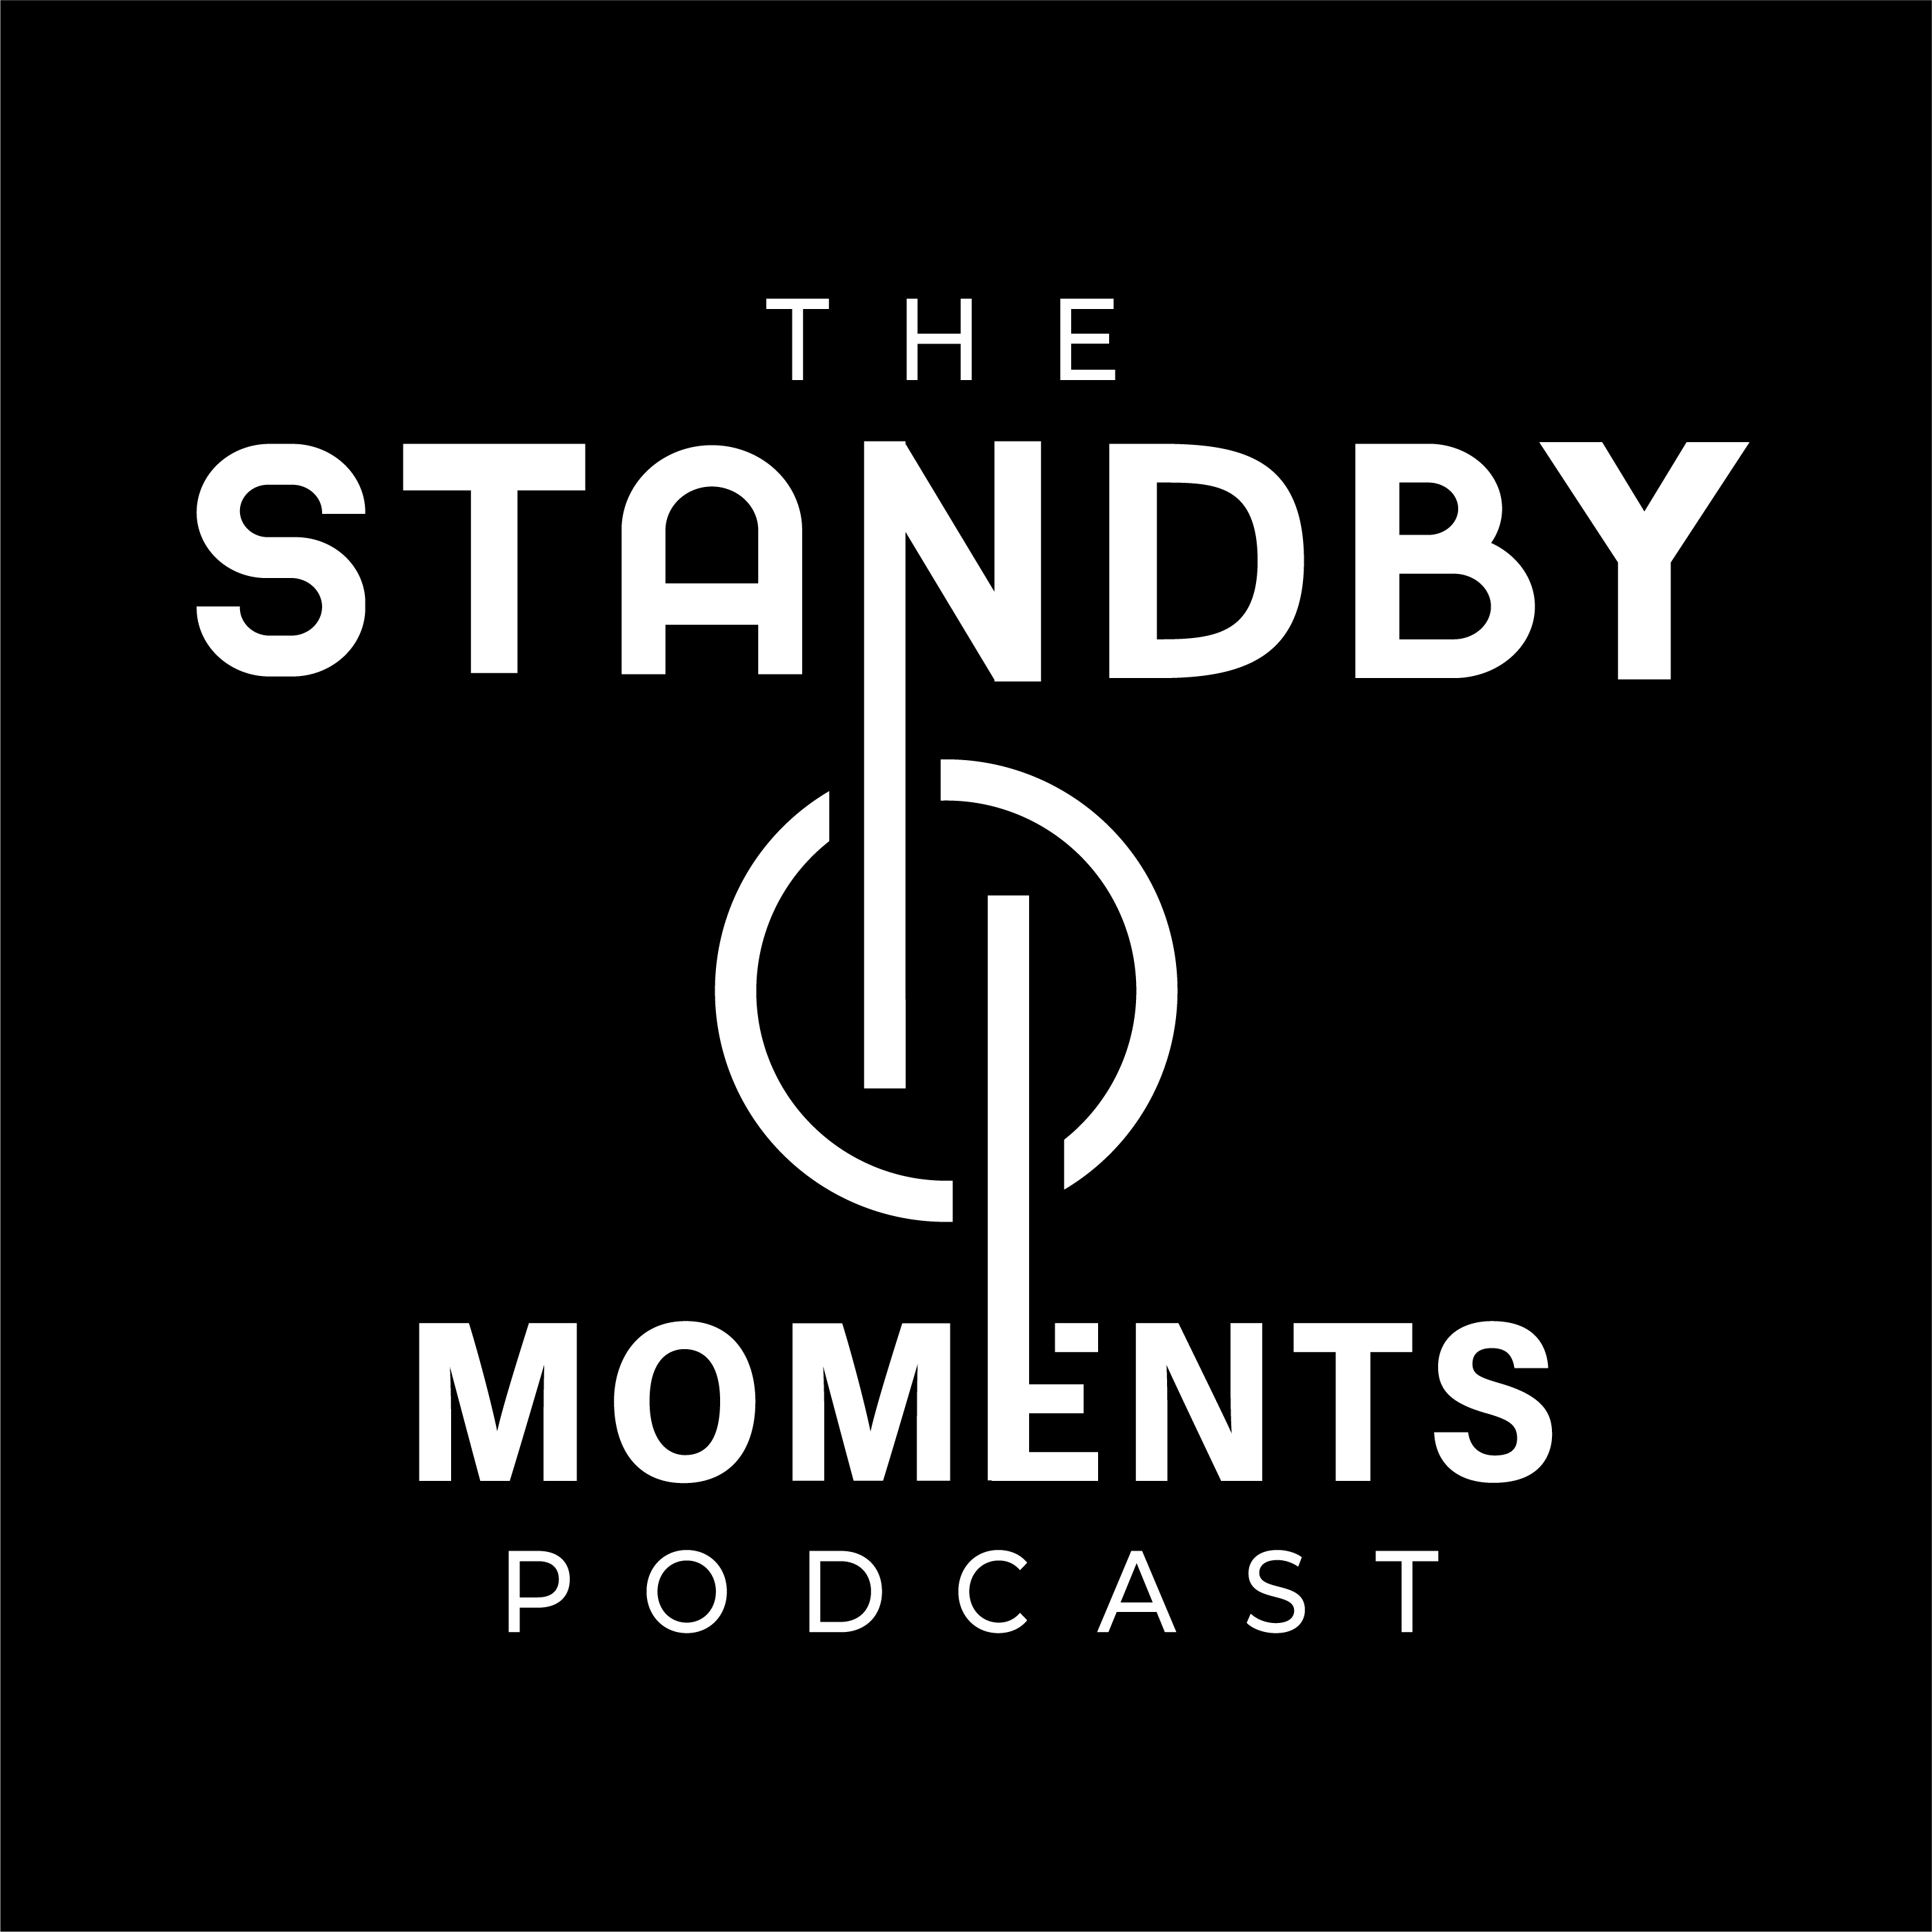 The Standby Moments Podcast